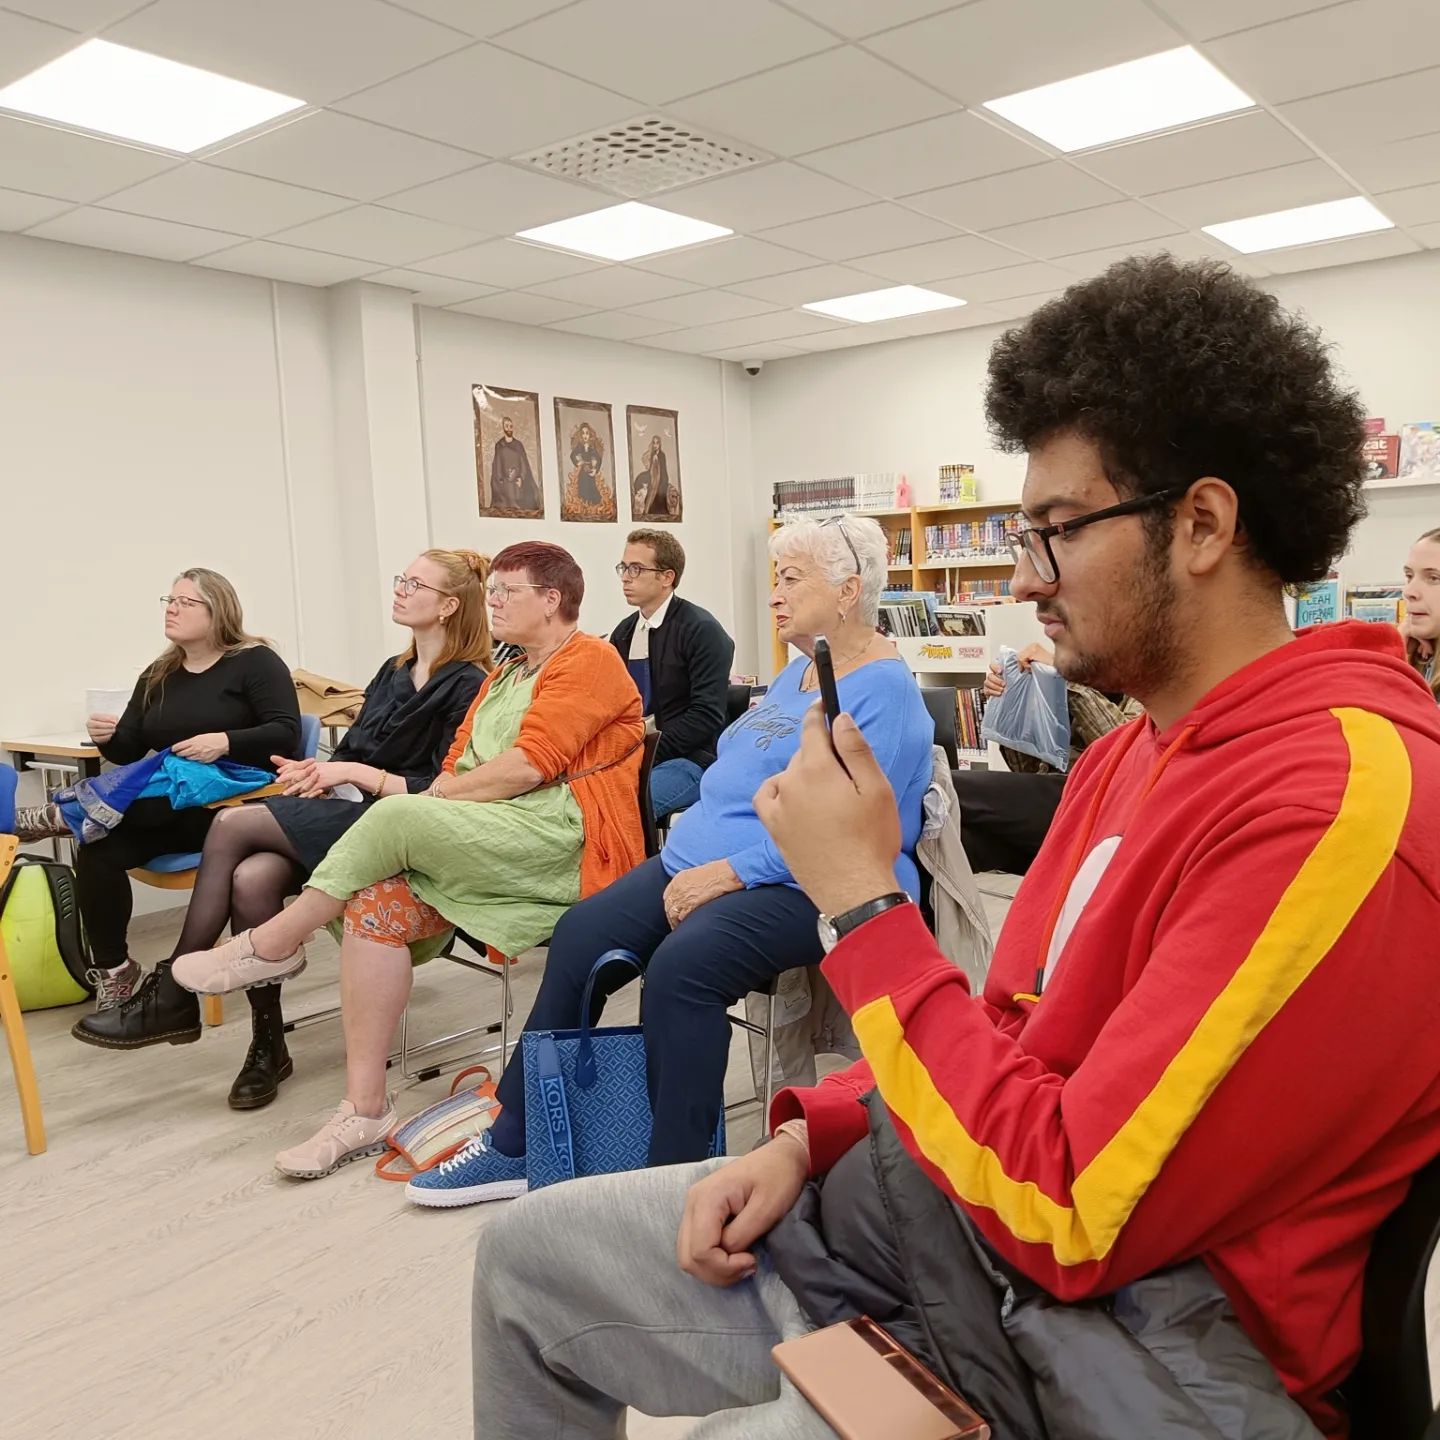 Workshop at Gardabaer Library, Reykjavik: Warps & Wefts: The Tapestry of India by Dr. Shilpa Khatri Babbar, Chair of Indian Studies at the University of Iceland (27 Aug 2022)